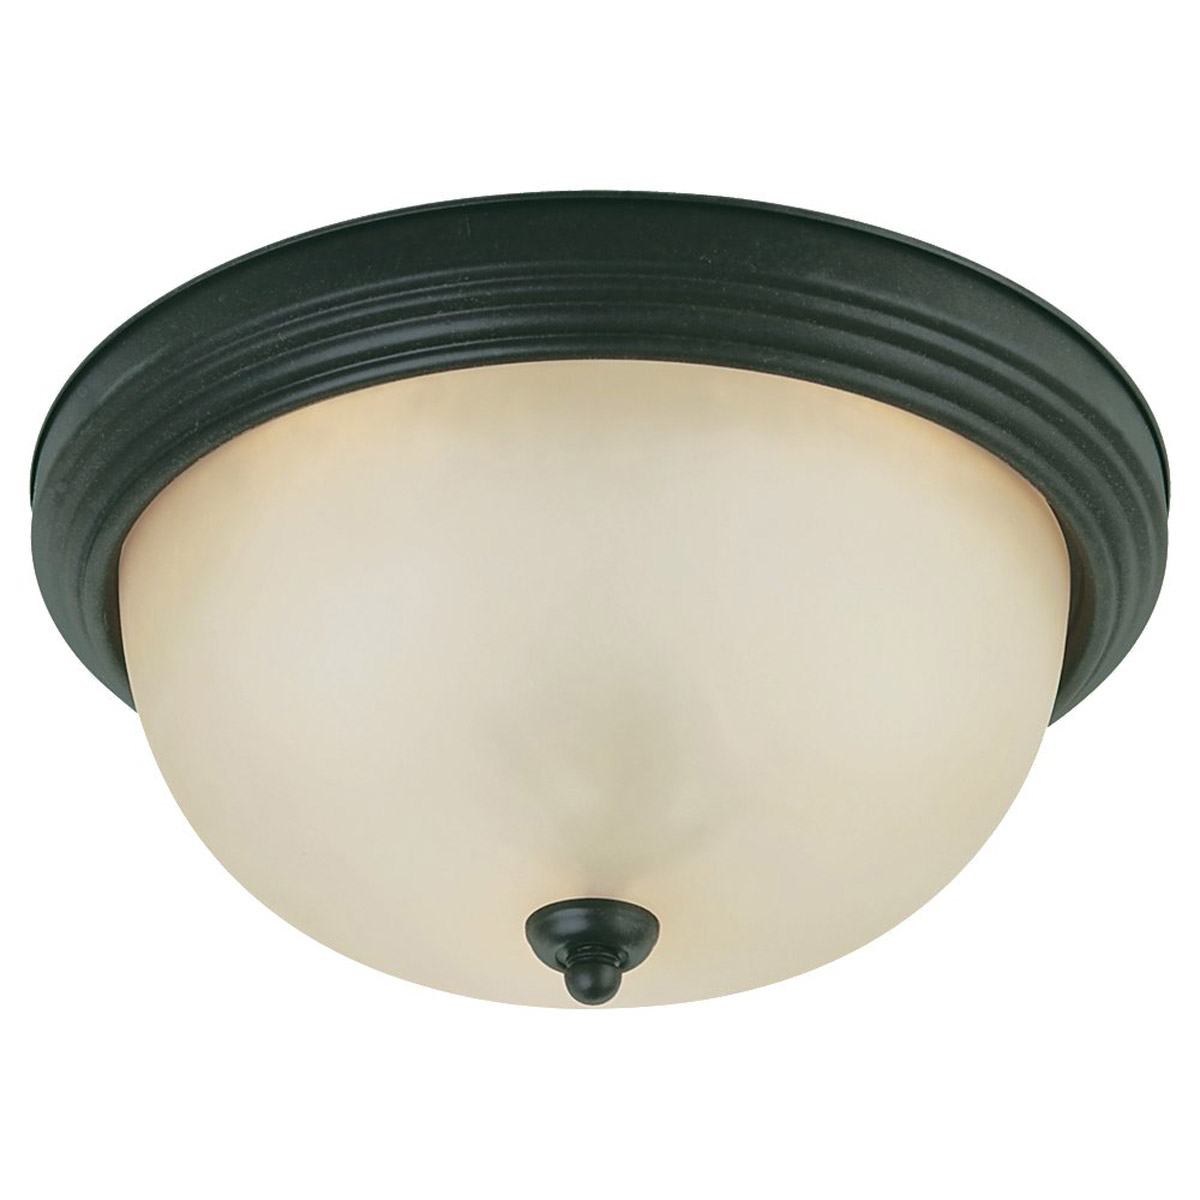 Sea Gull 77164-820 Del Prato 2 Light 13 inch Chestnut Bronze Flush Mount Ceiling Light in Etched Cafe Tint Glass 